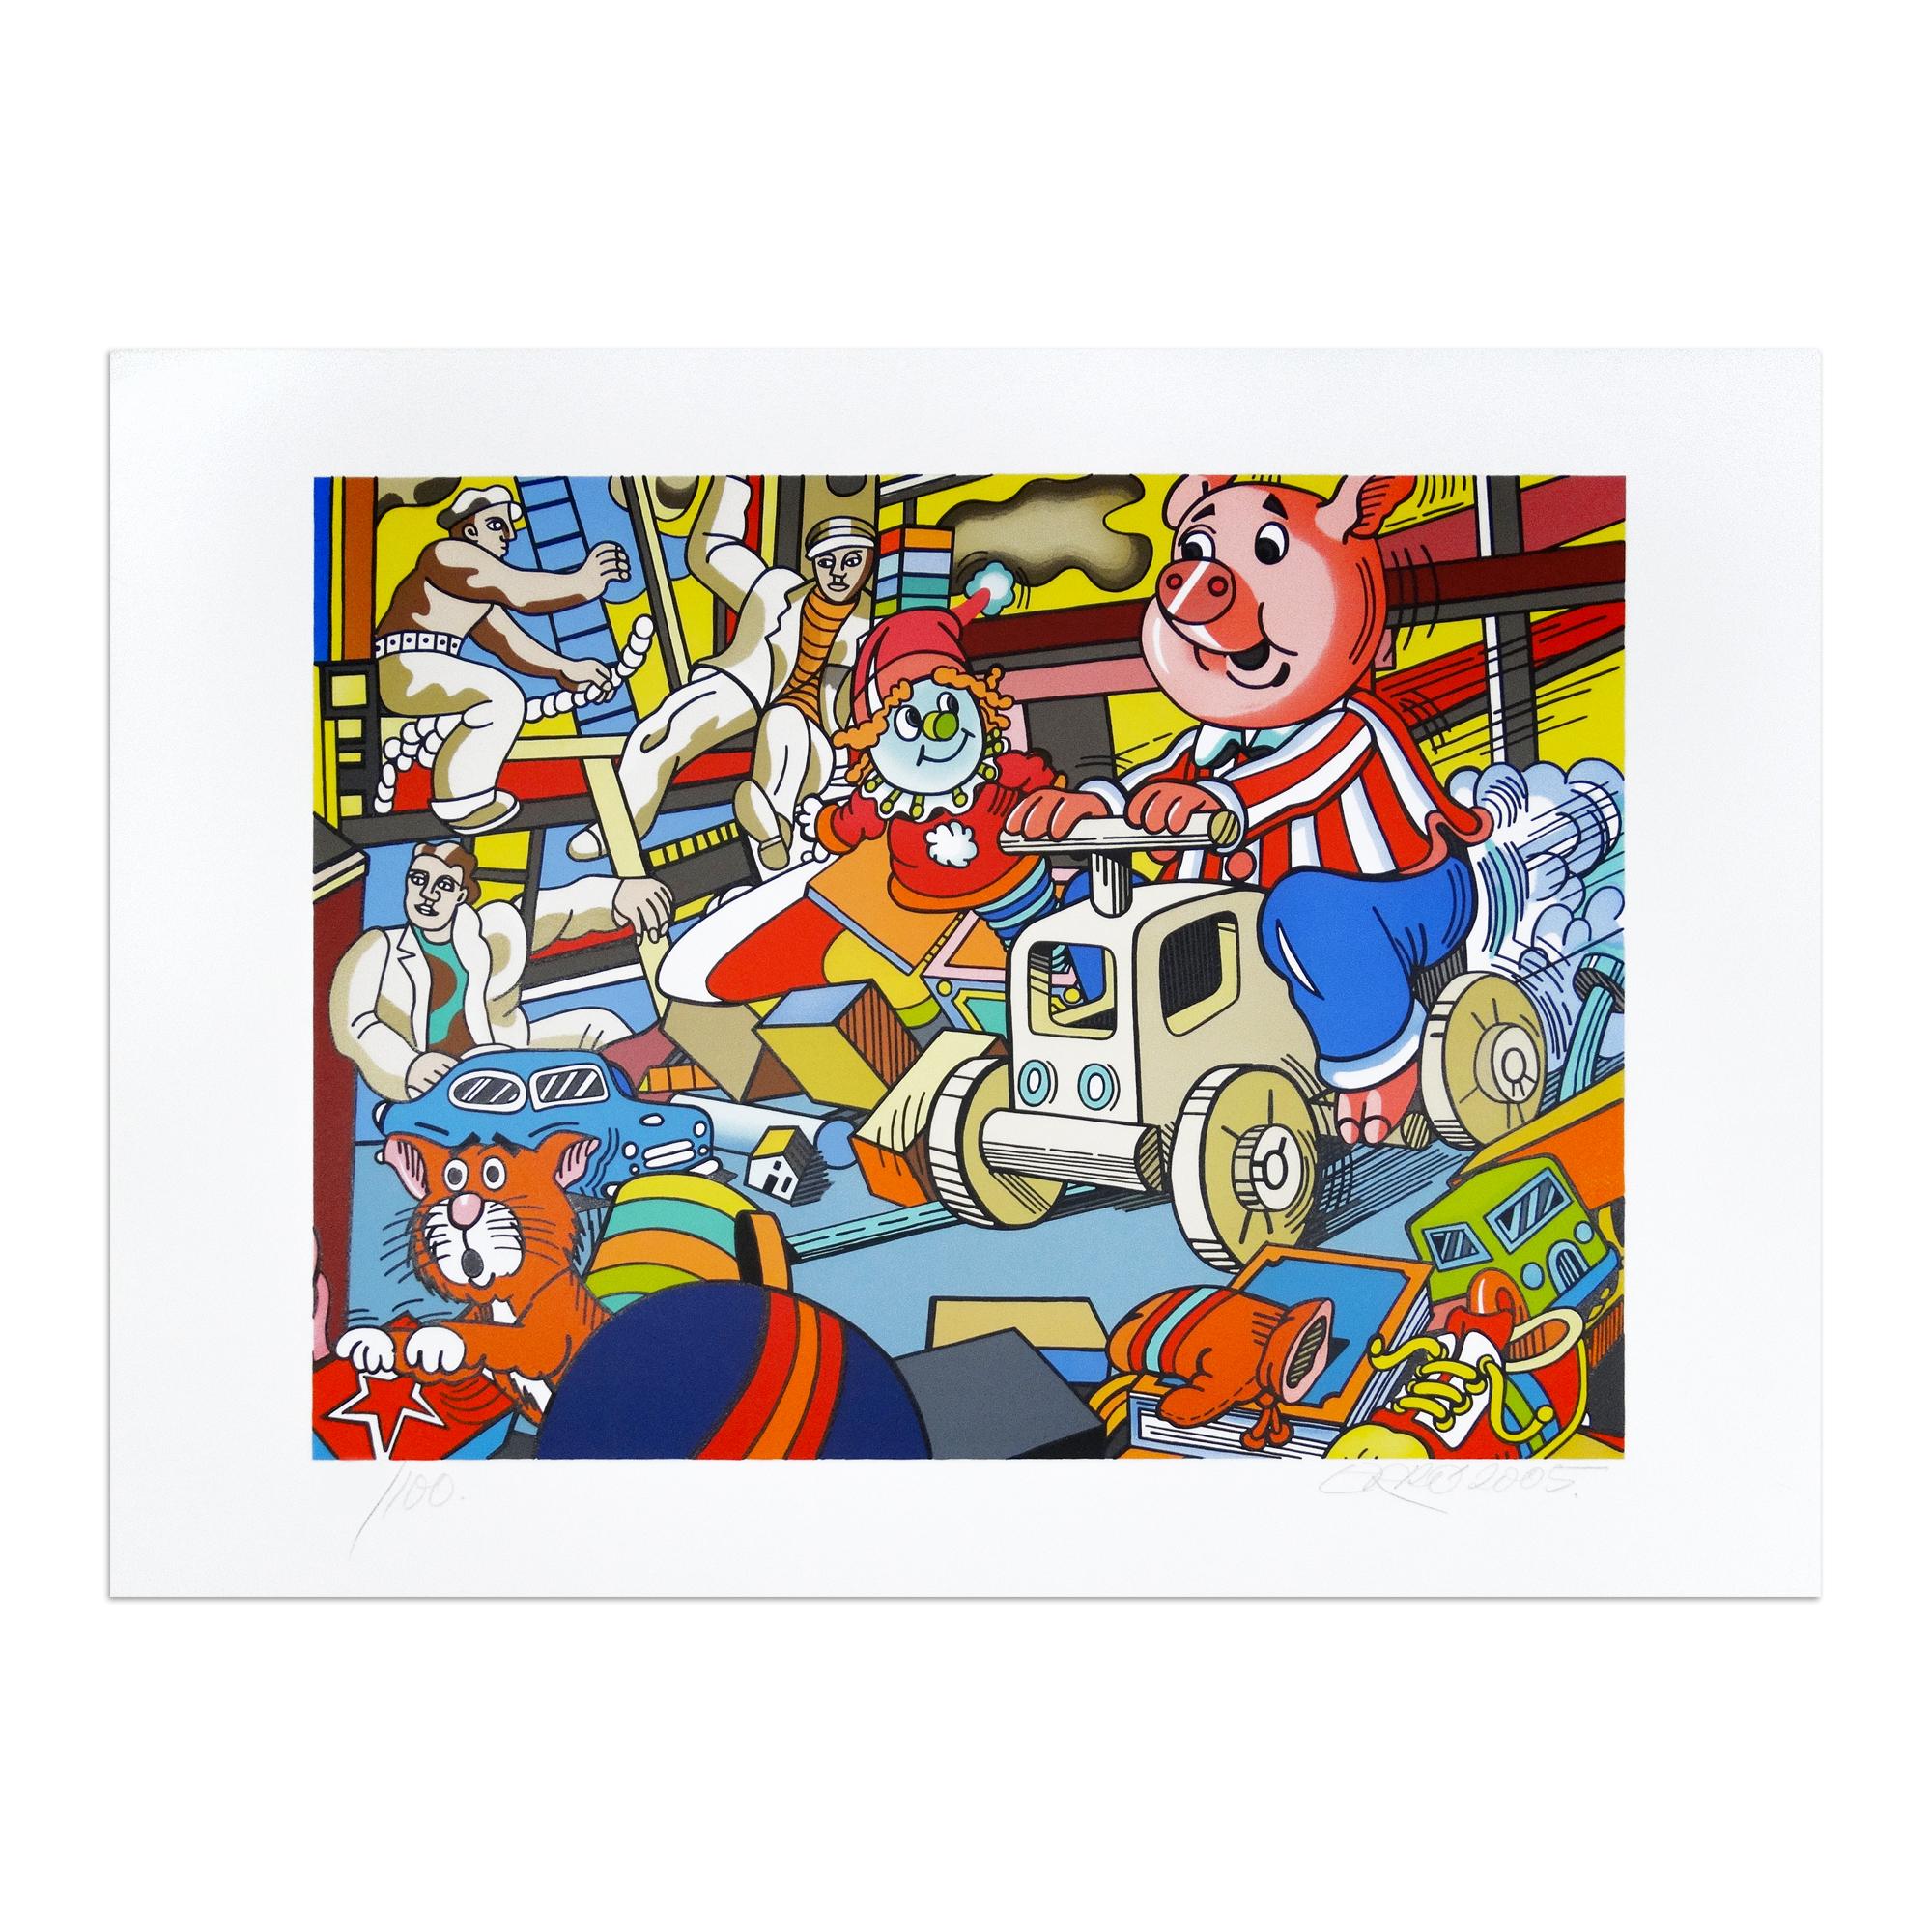 Erró (born 1932 in Iceland)
Léger, 2005
Medium: Lithograph on paper
Dimensions: 46 x 61 cm
Edition of 120: Hand signed and numbered
Condition: Excellent
